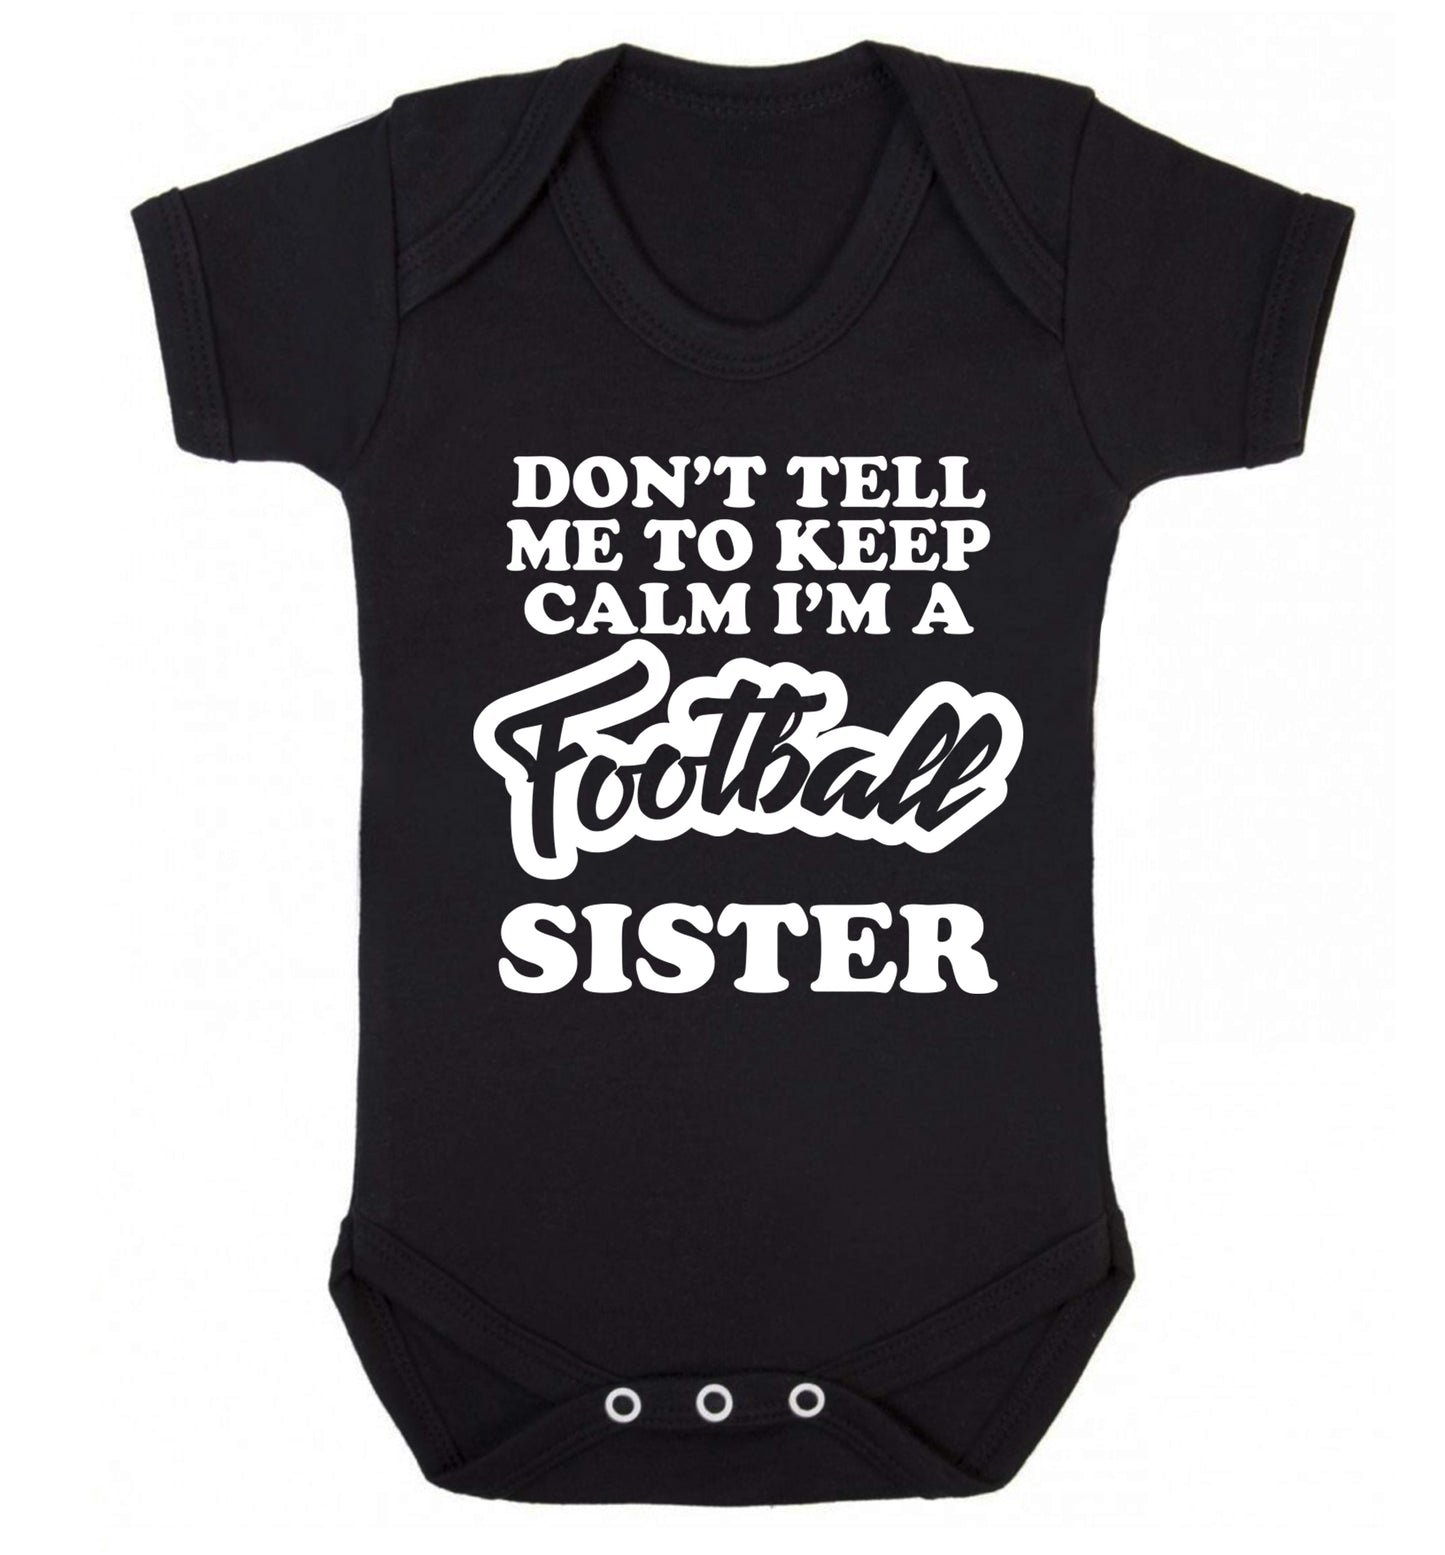 Don't tell me to keep calm I'm a football sister Baby Vest black 18-24 months